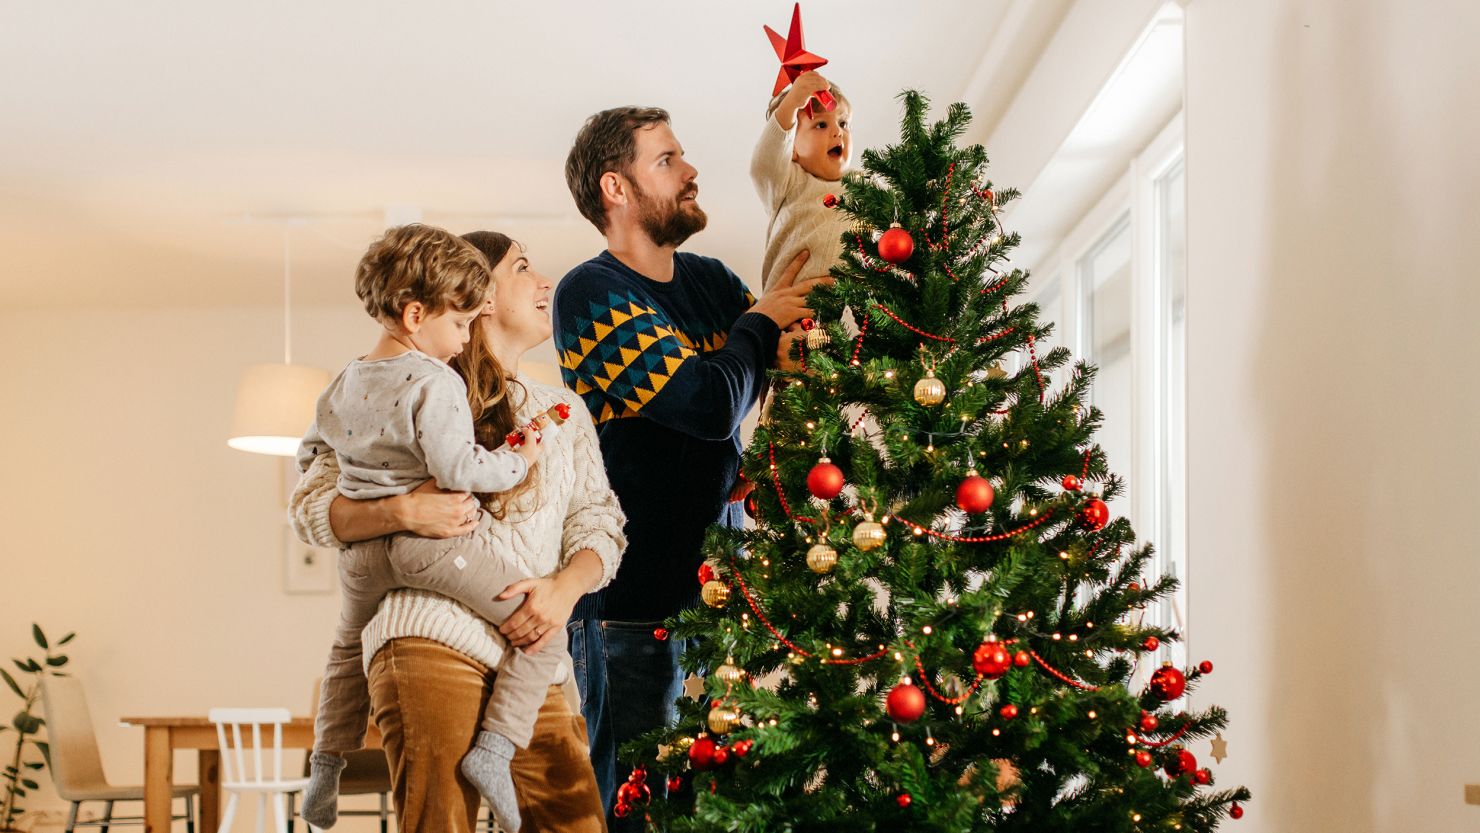 Best Artificial Christmas Trees for Sale - Treetime